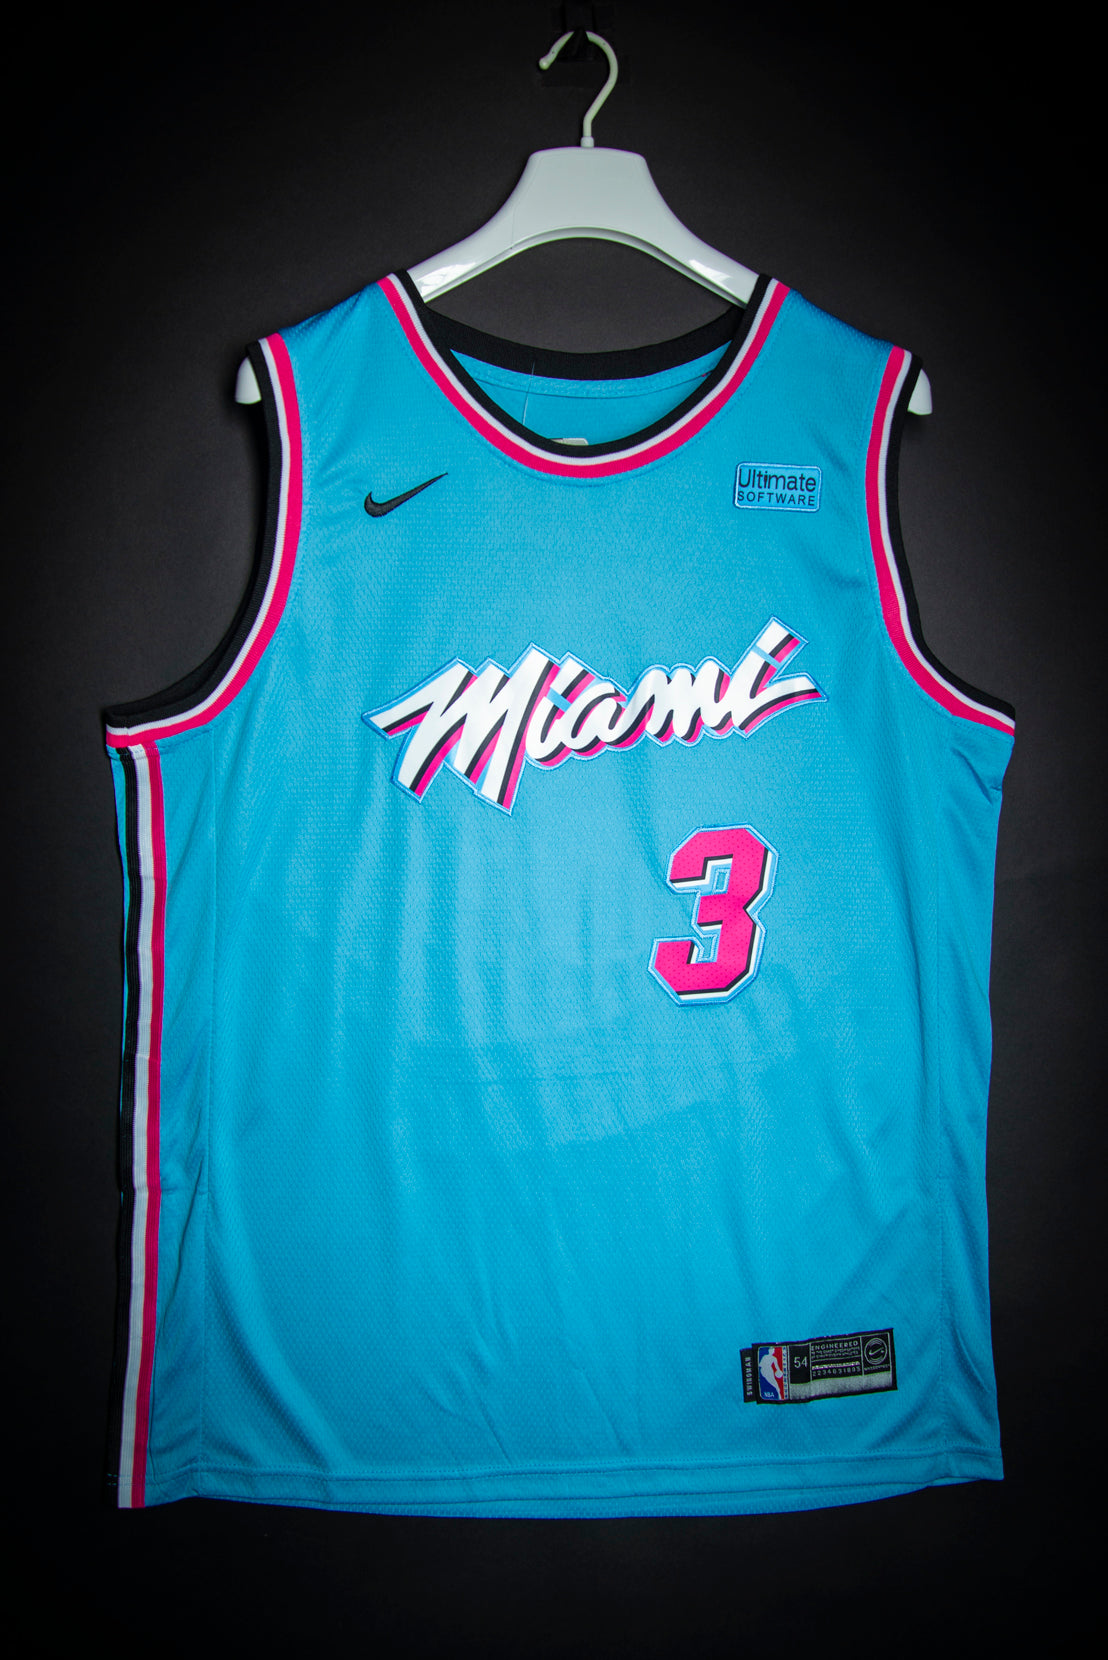 Pink NBA Jerseys for sale